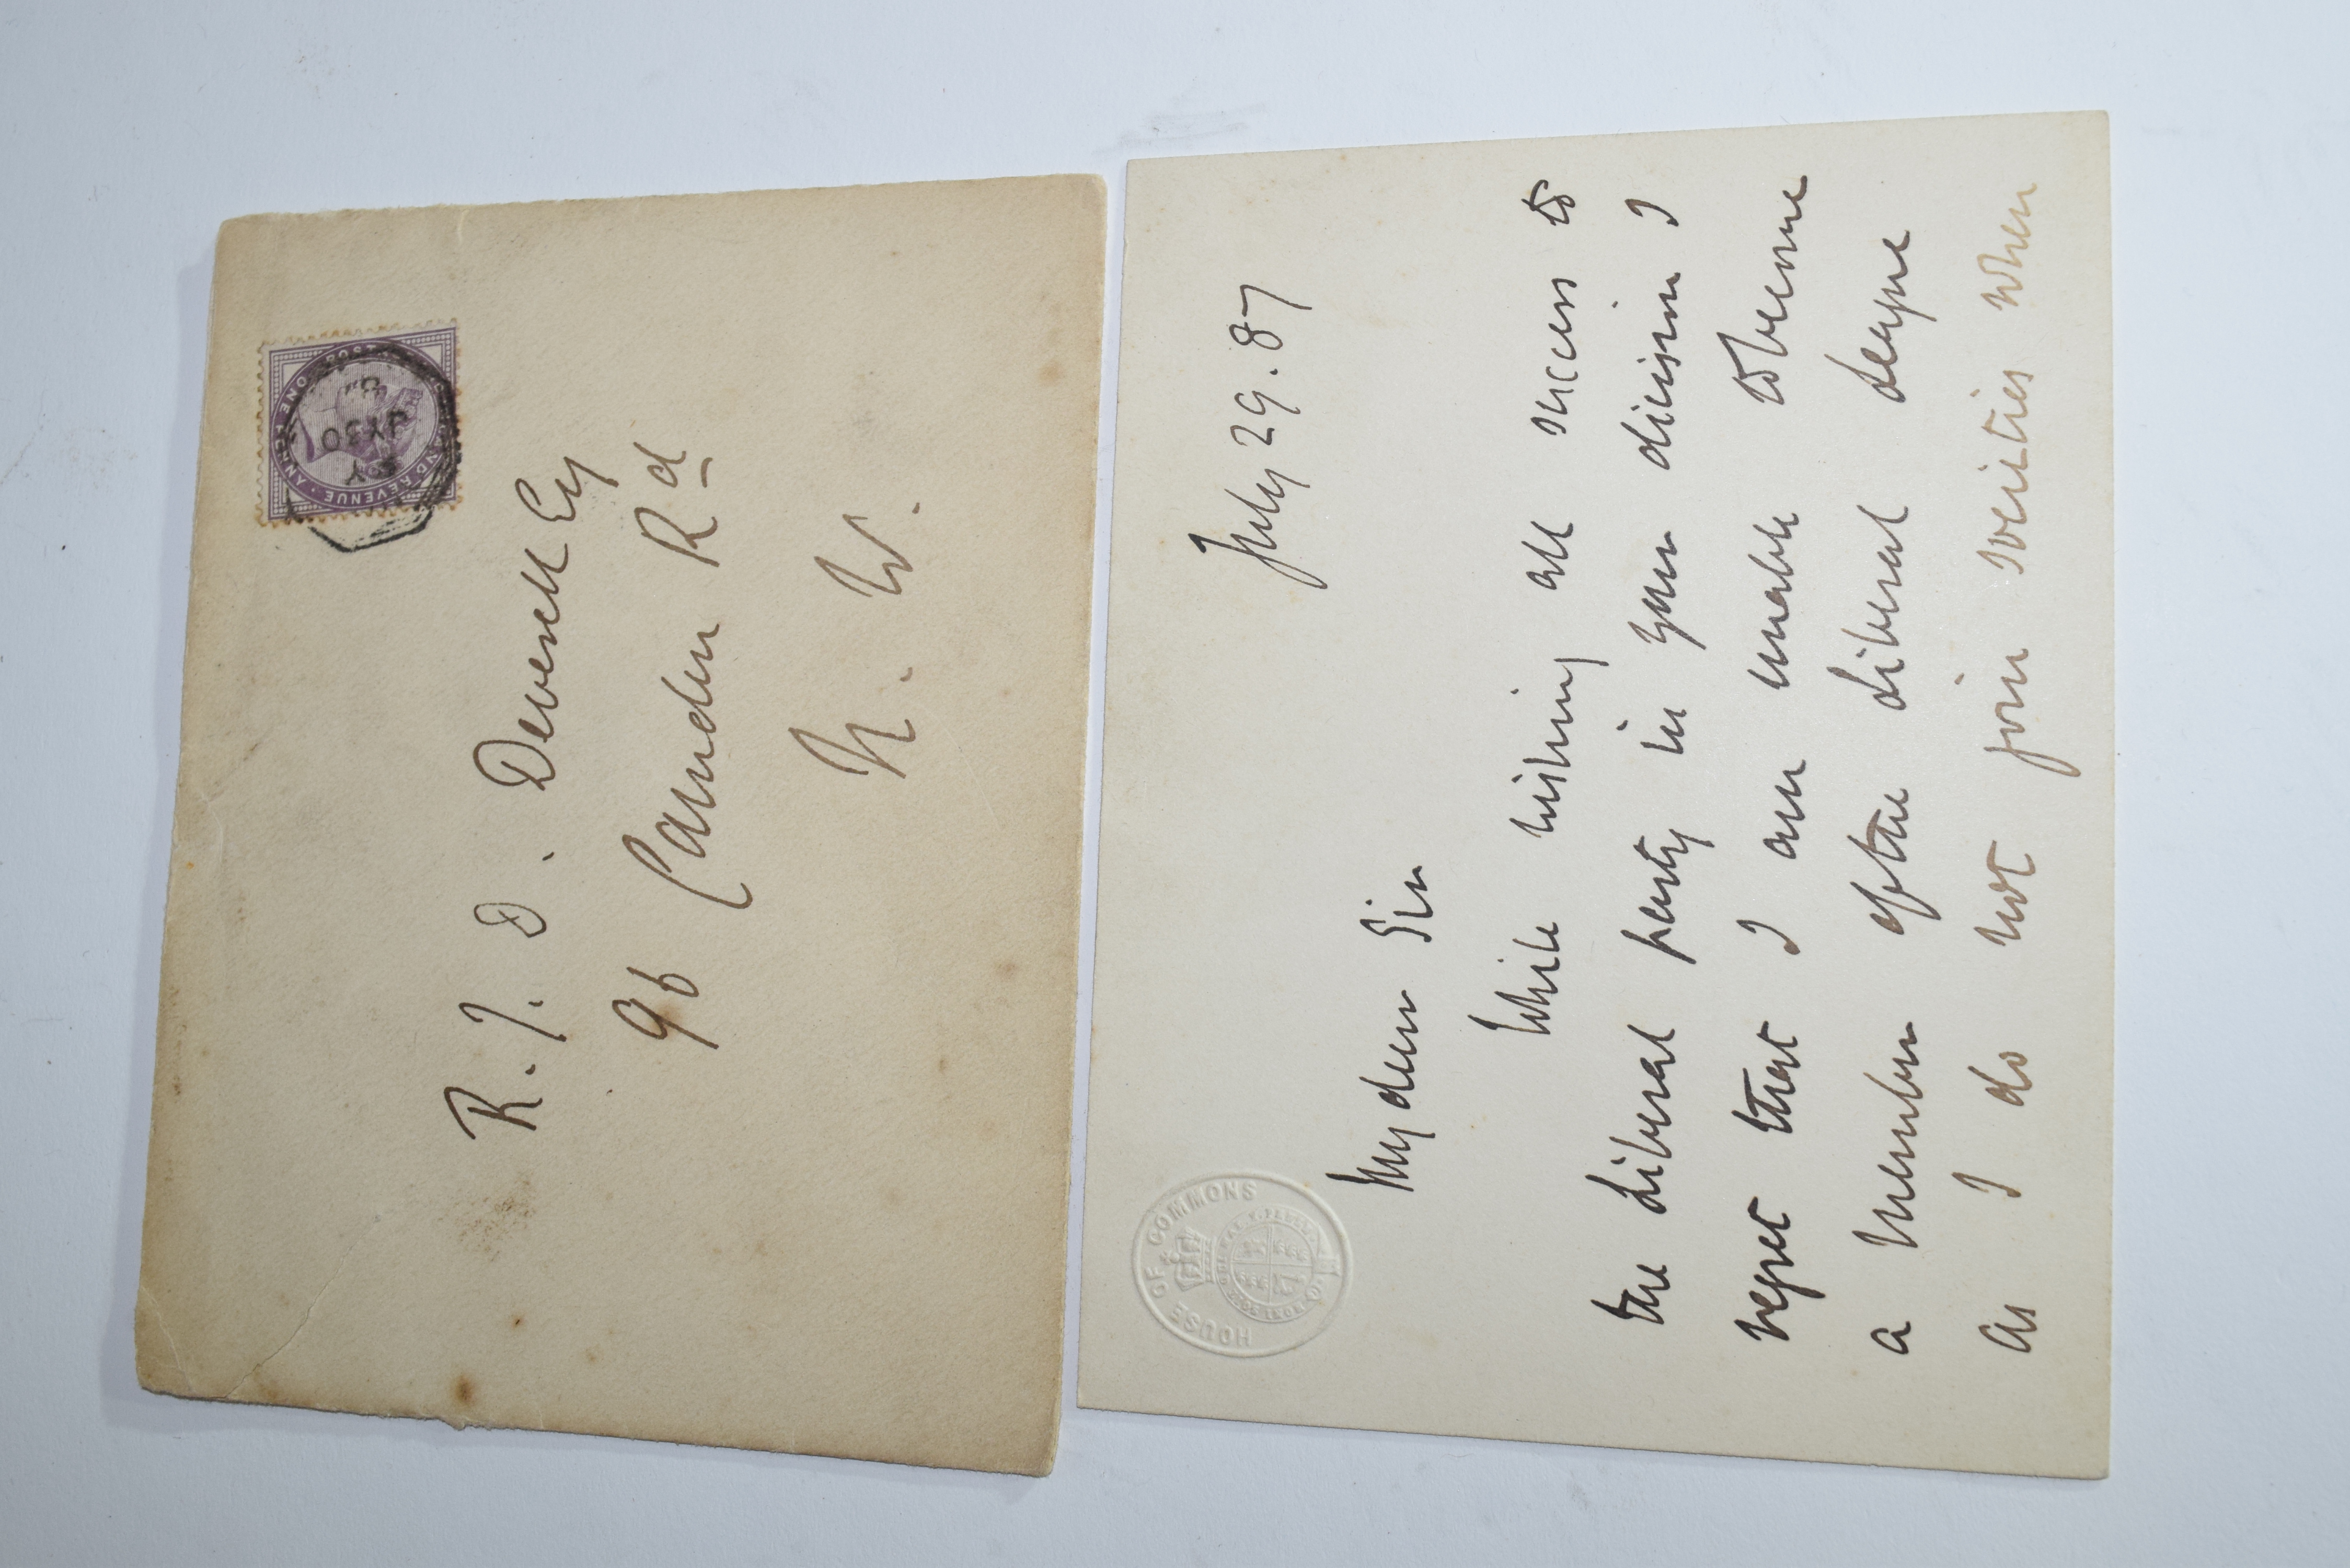 Letter on House of Commons paper signed by Gladstone dated July 1887 together with original - Image 2 of 3